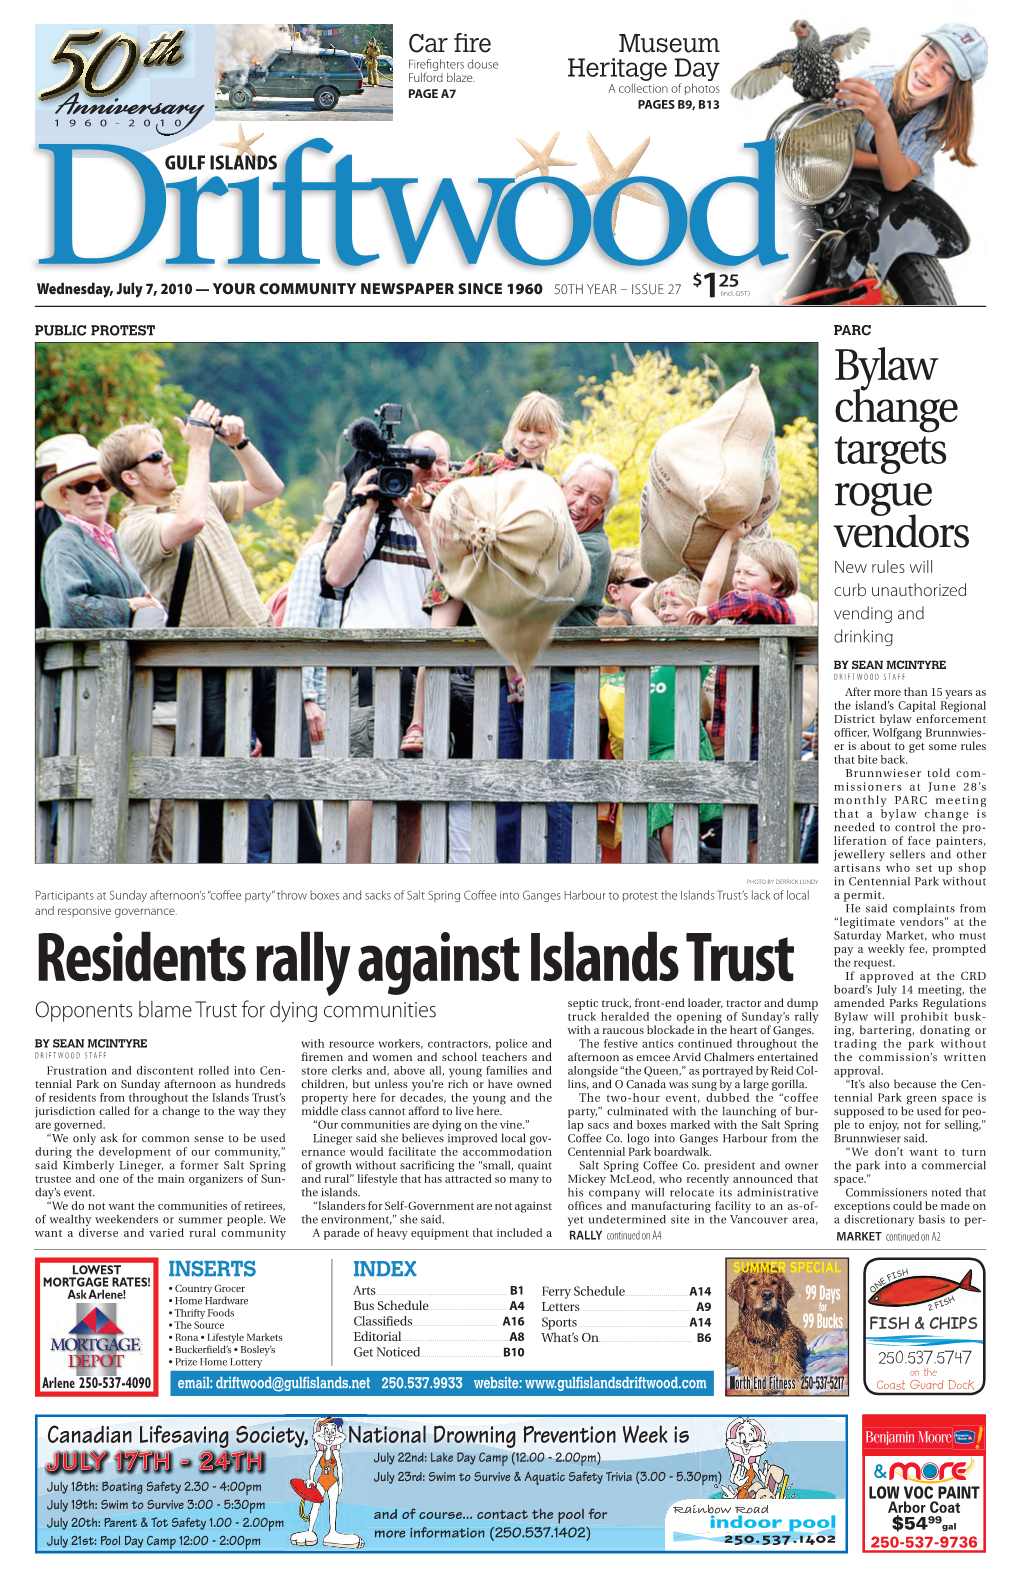 Residents Rally Against Islands Trust